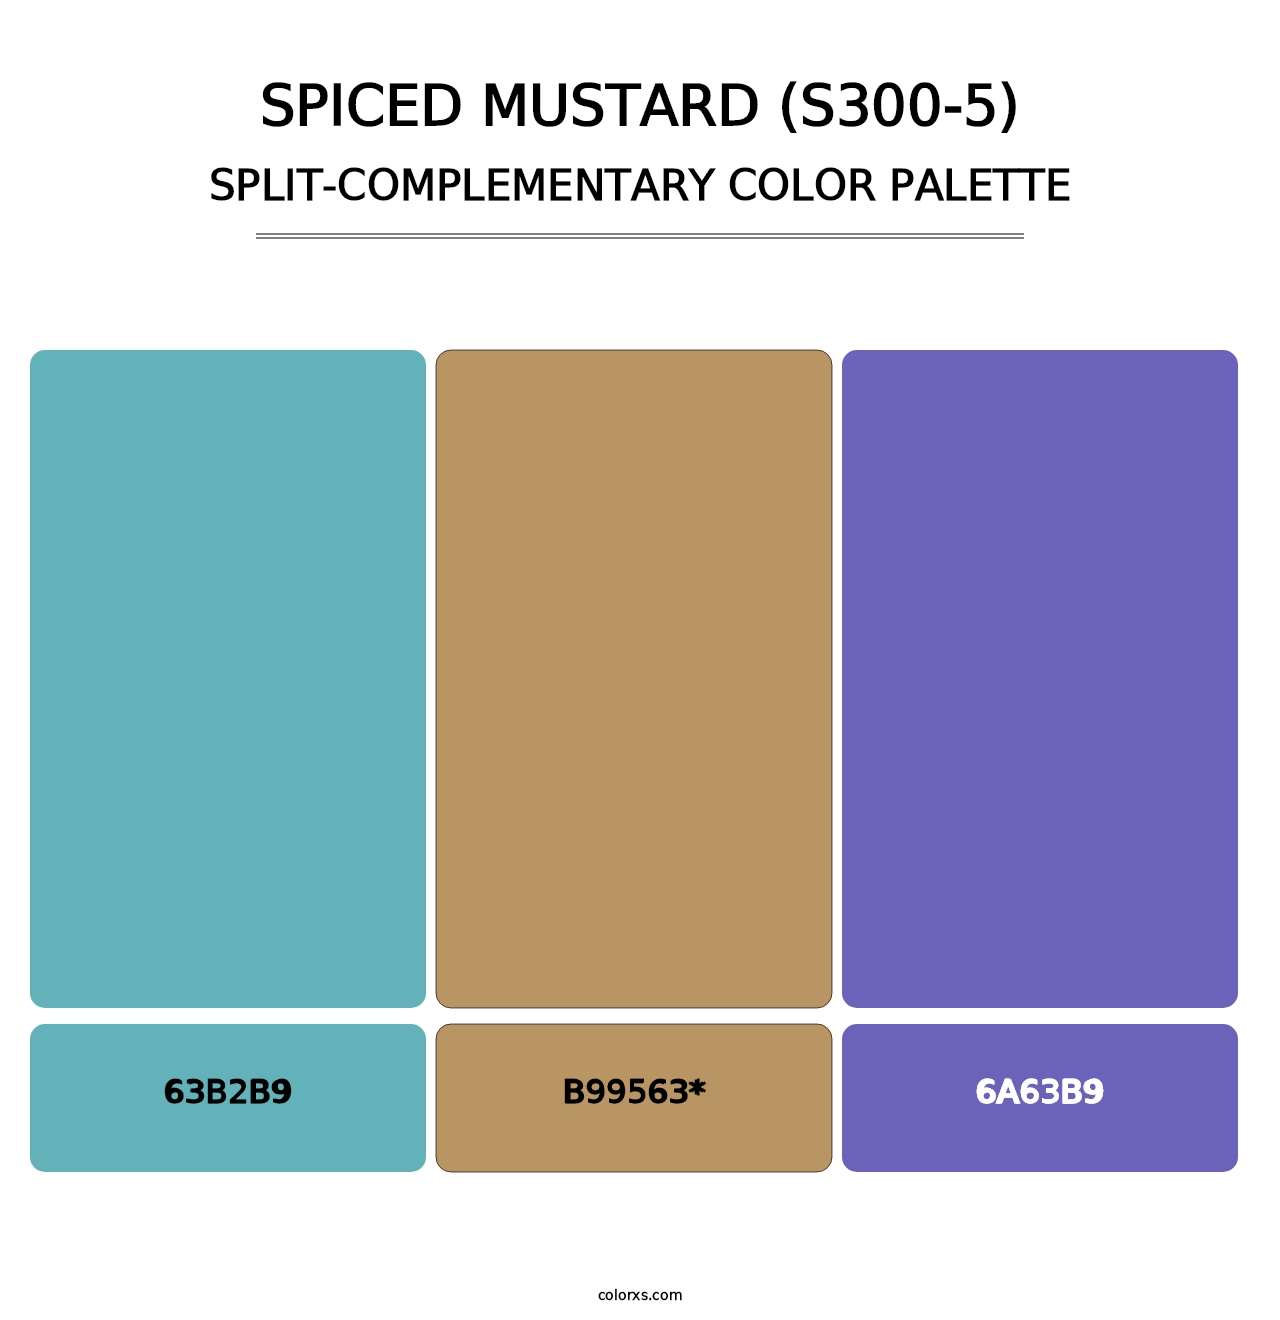 Spiced Mustard (S300-5) - Split-Complementary Color Palette